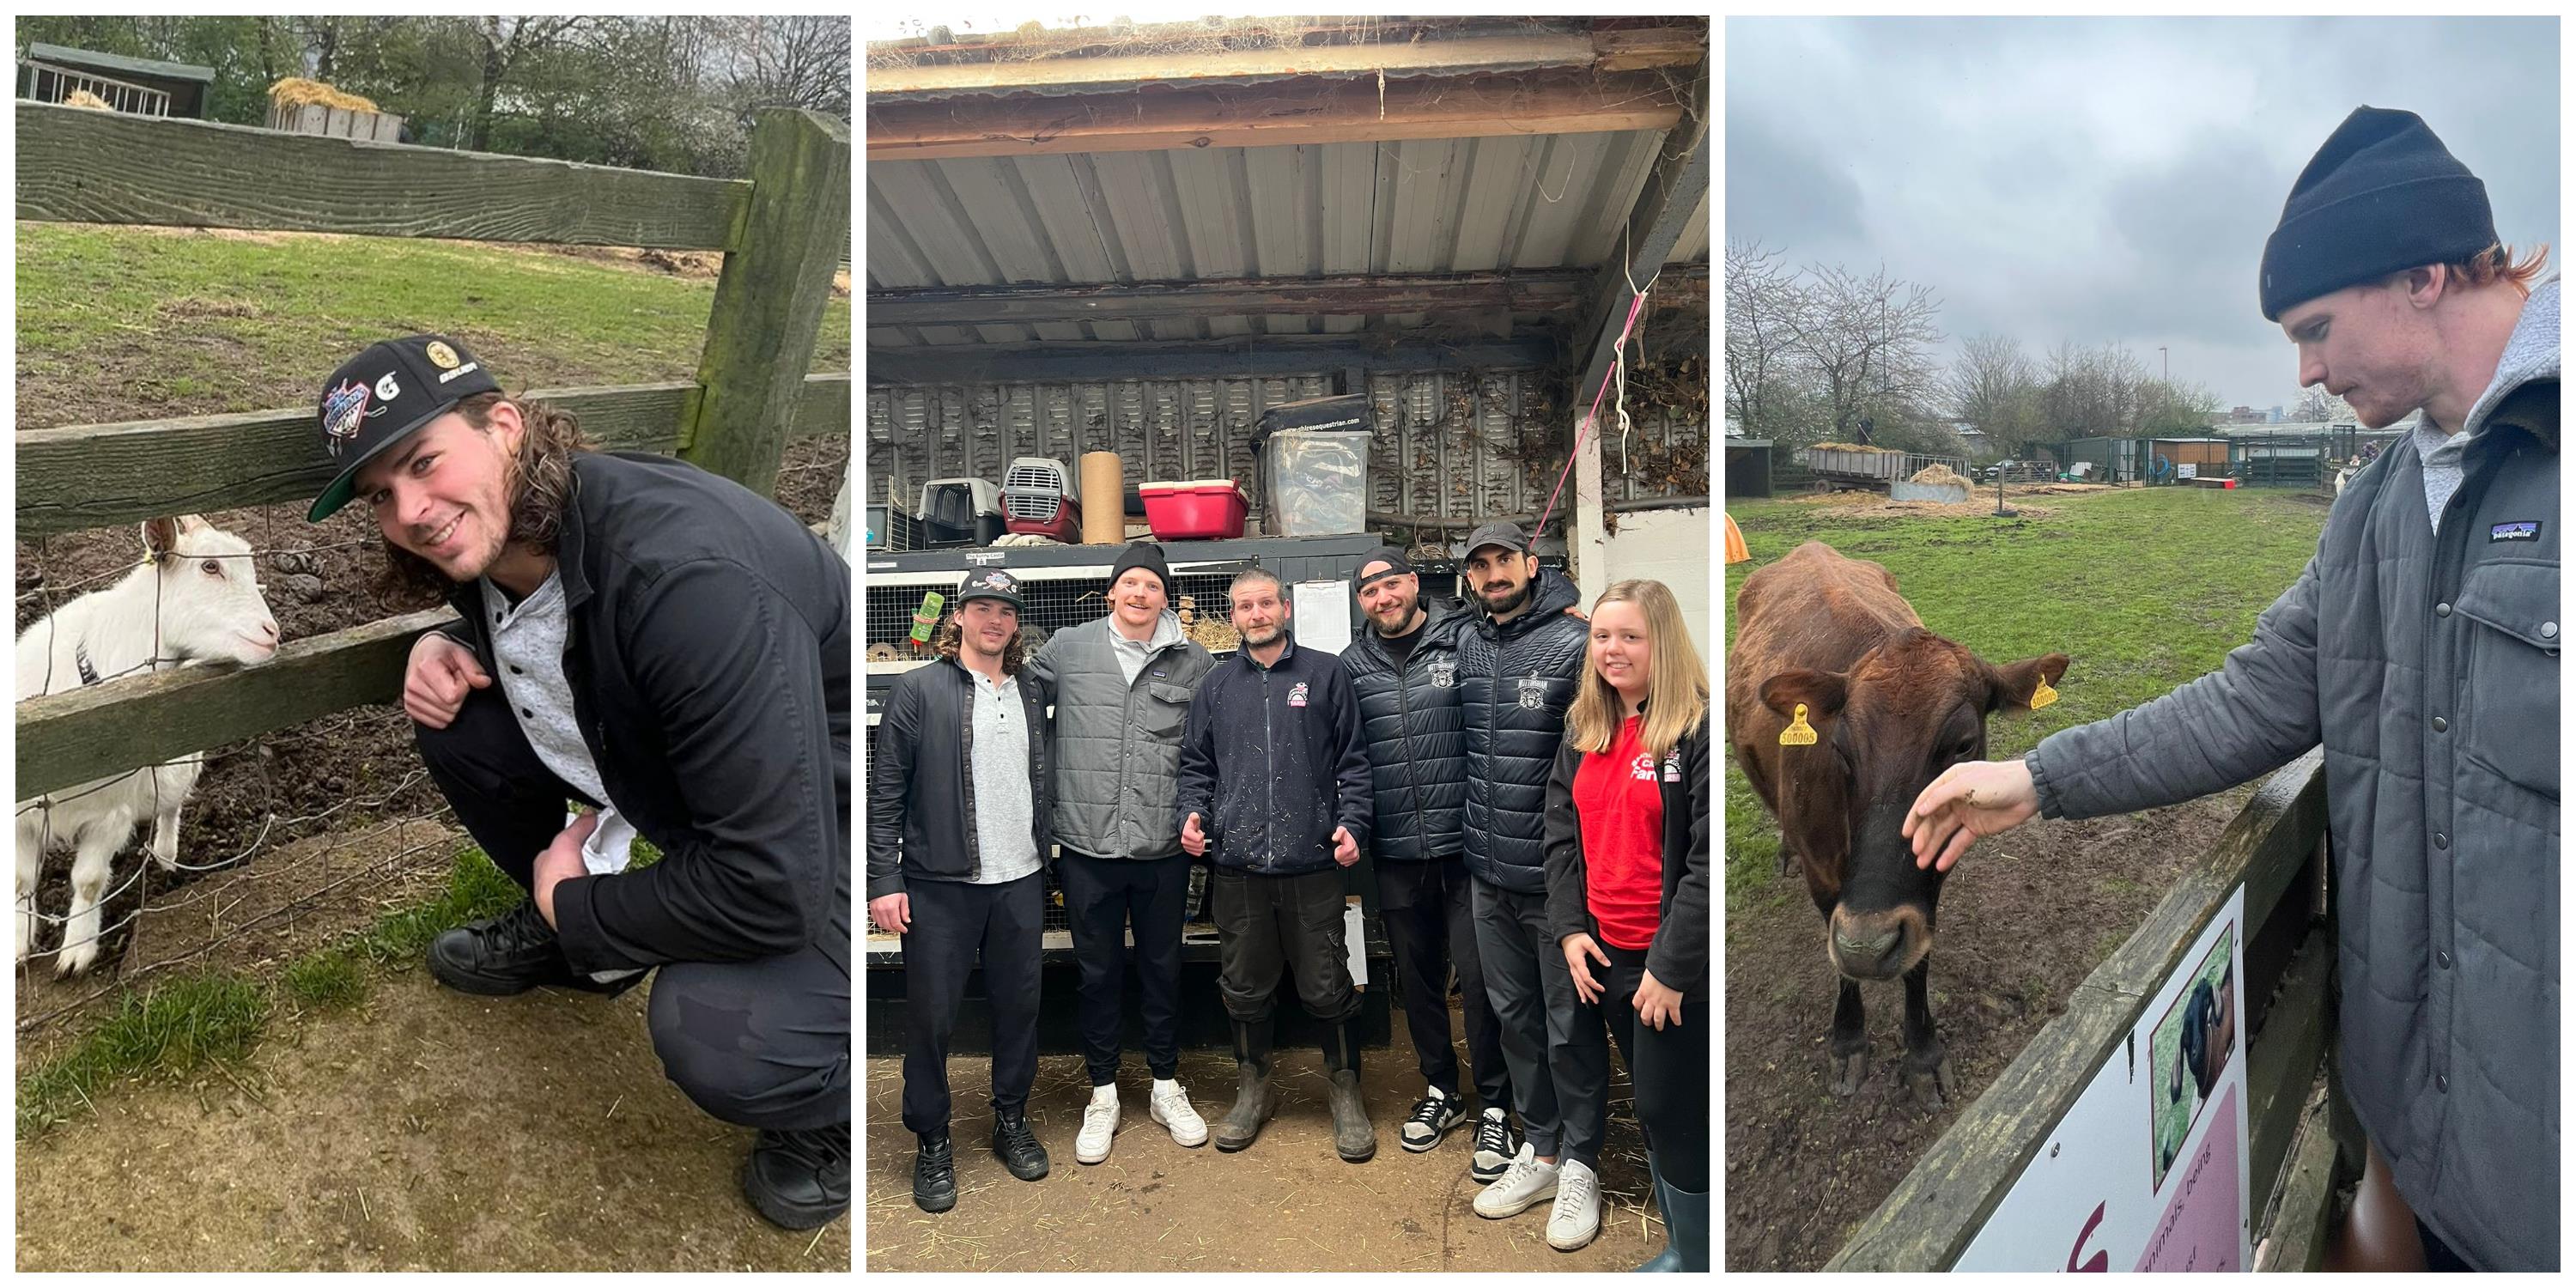 PANTHERS PLAYERS VISIT LOCAL FARM Top Image